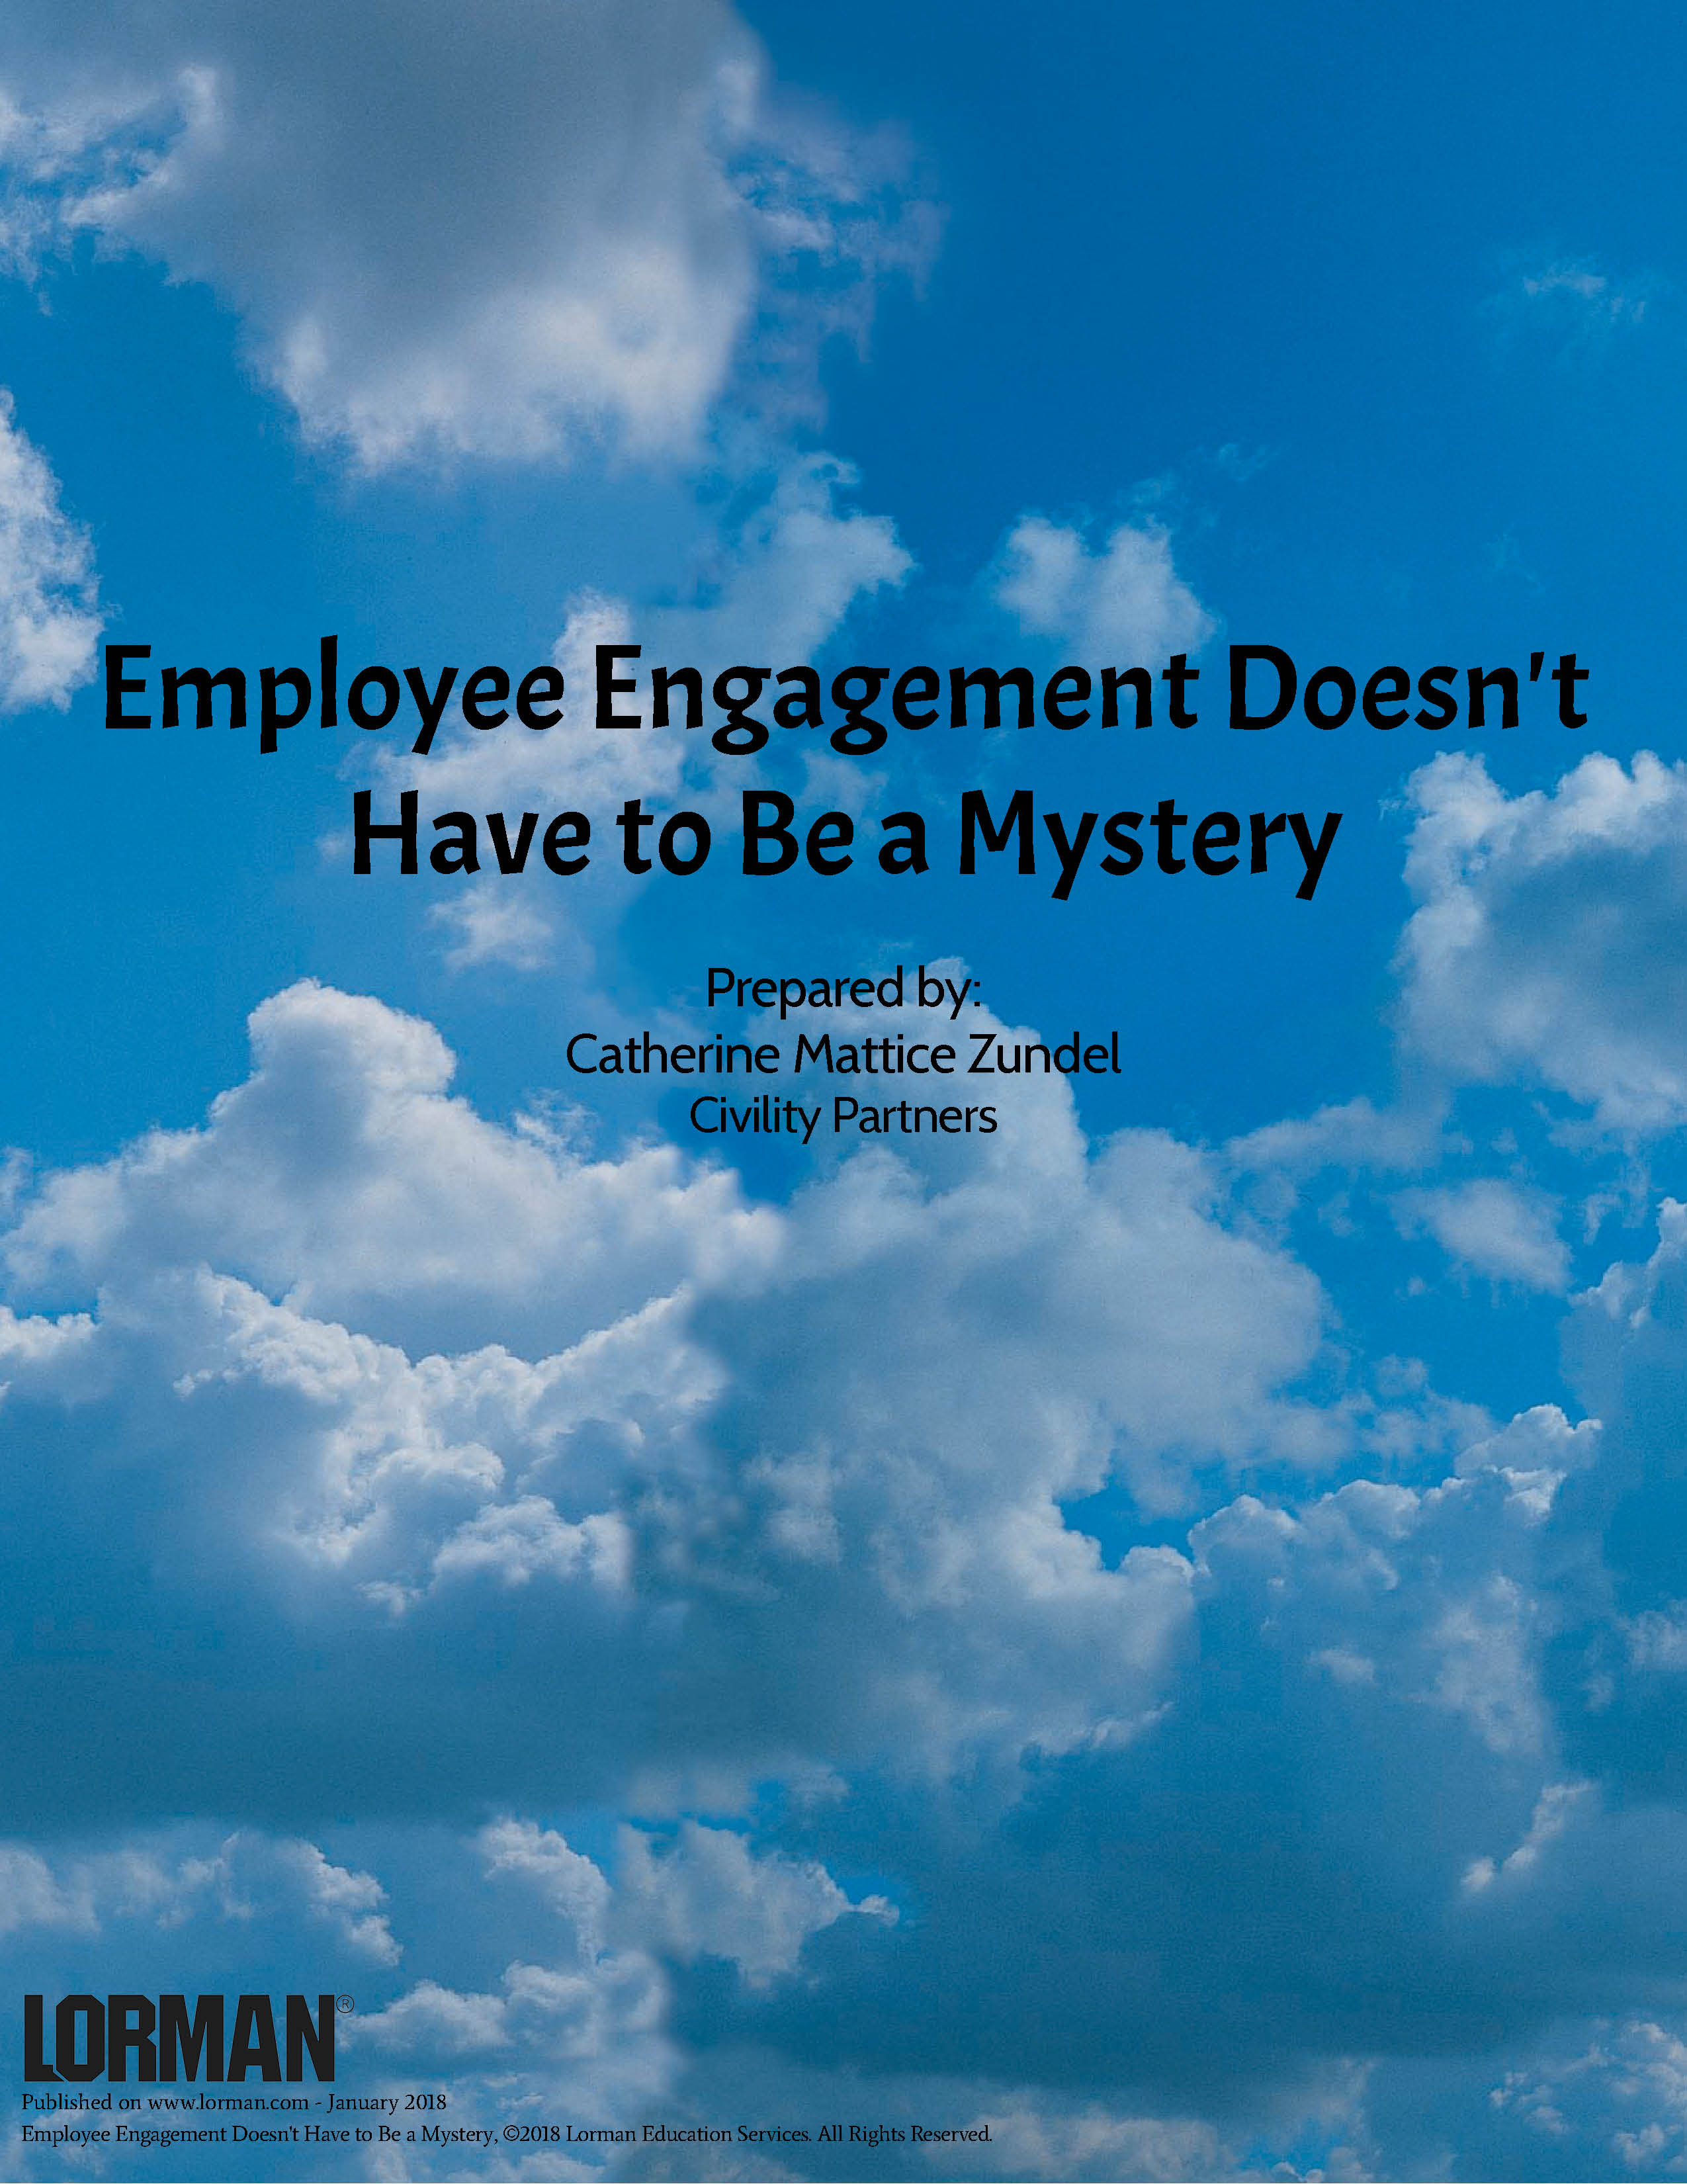 Employee Engagement Doesn't Have to Be a Mystery